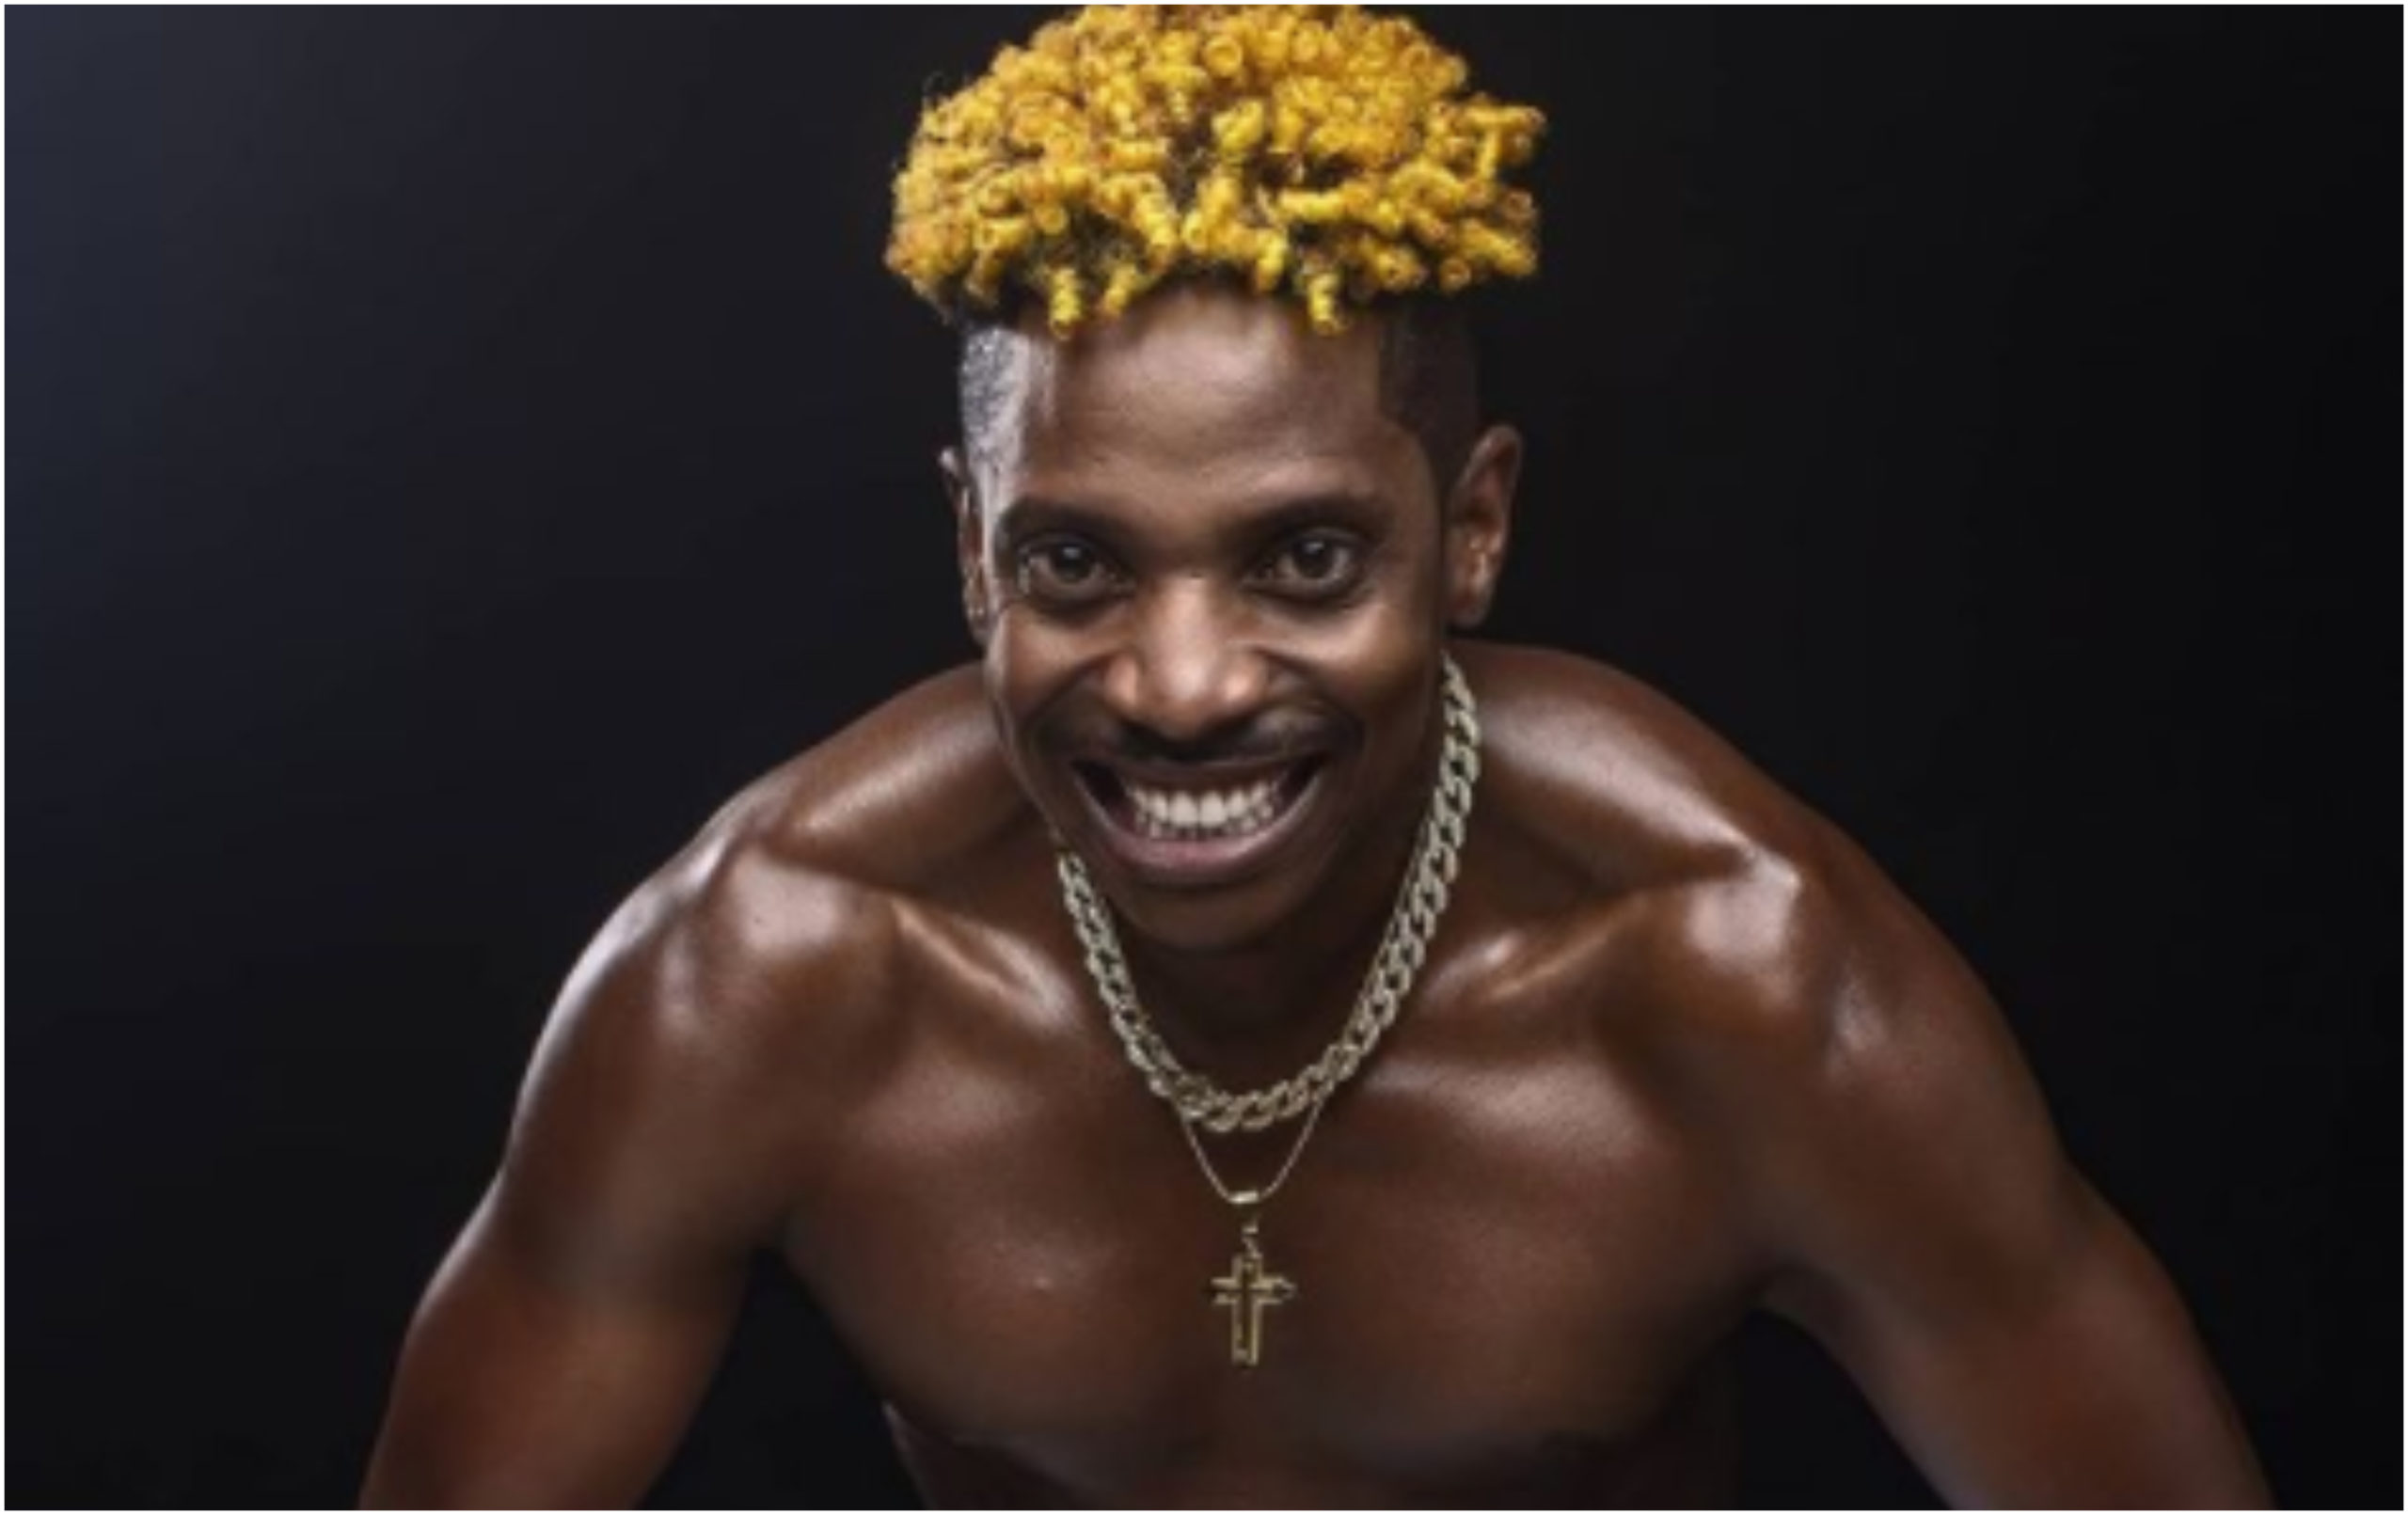 “I’ve been on a gym workout routine for 8 months,” Eric Omondi explains his ‘sudden’ weight gain